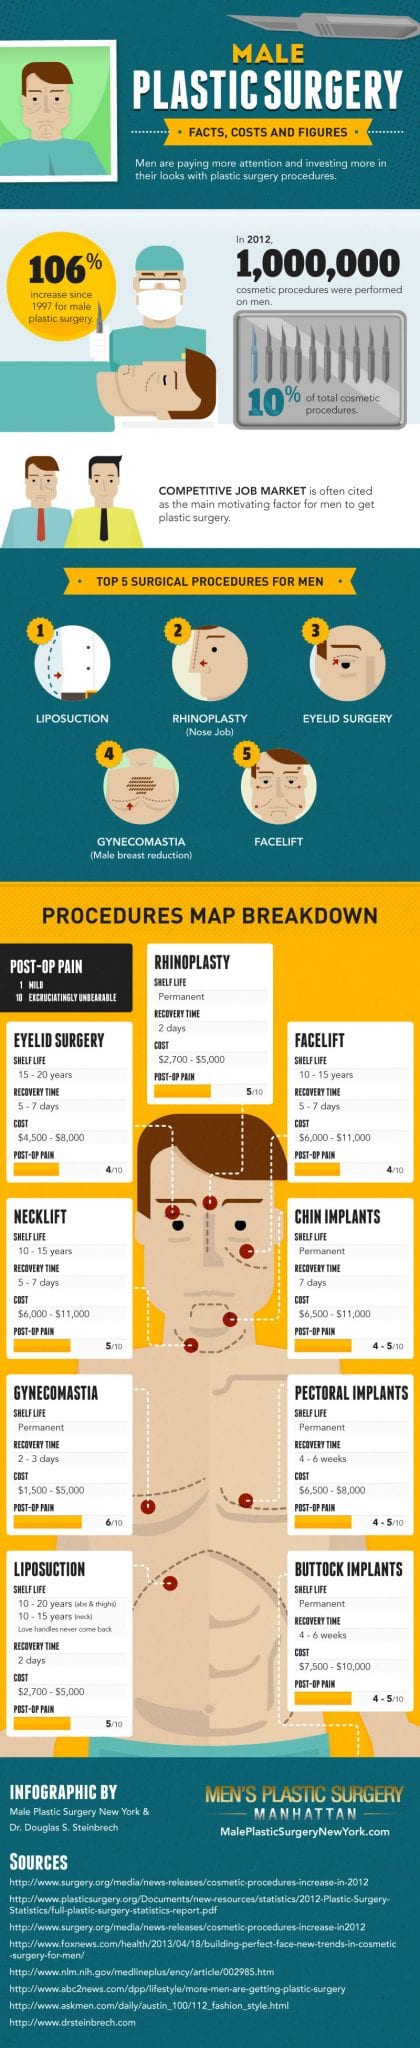 male-plastic-surgery-ny-infographic